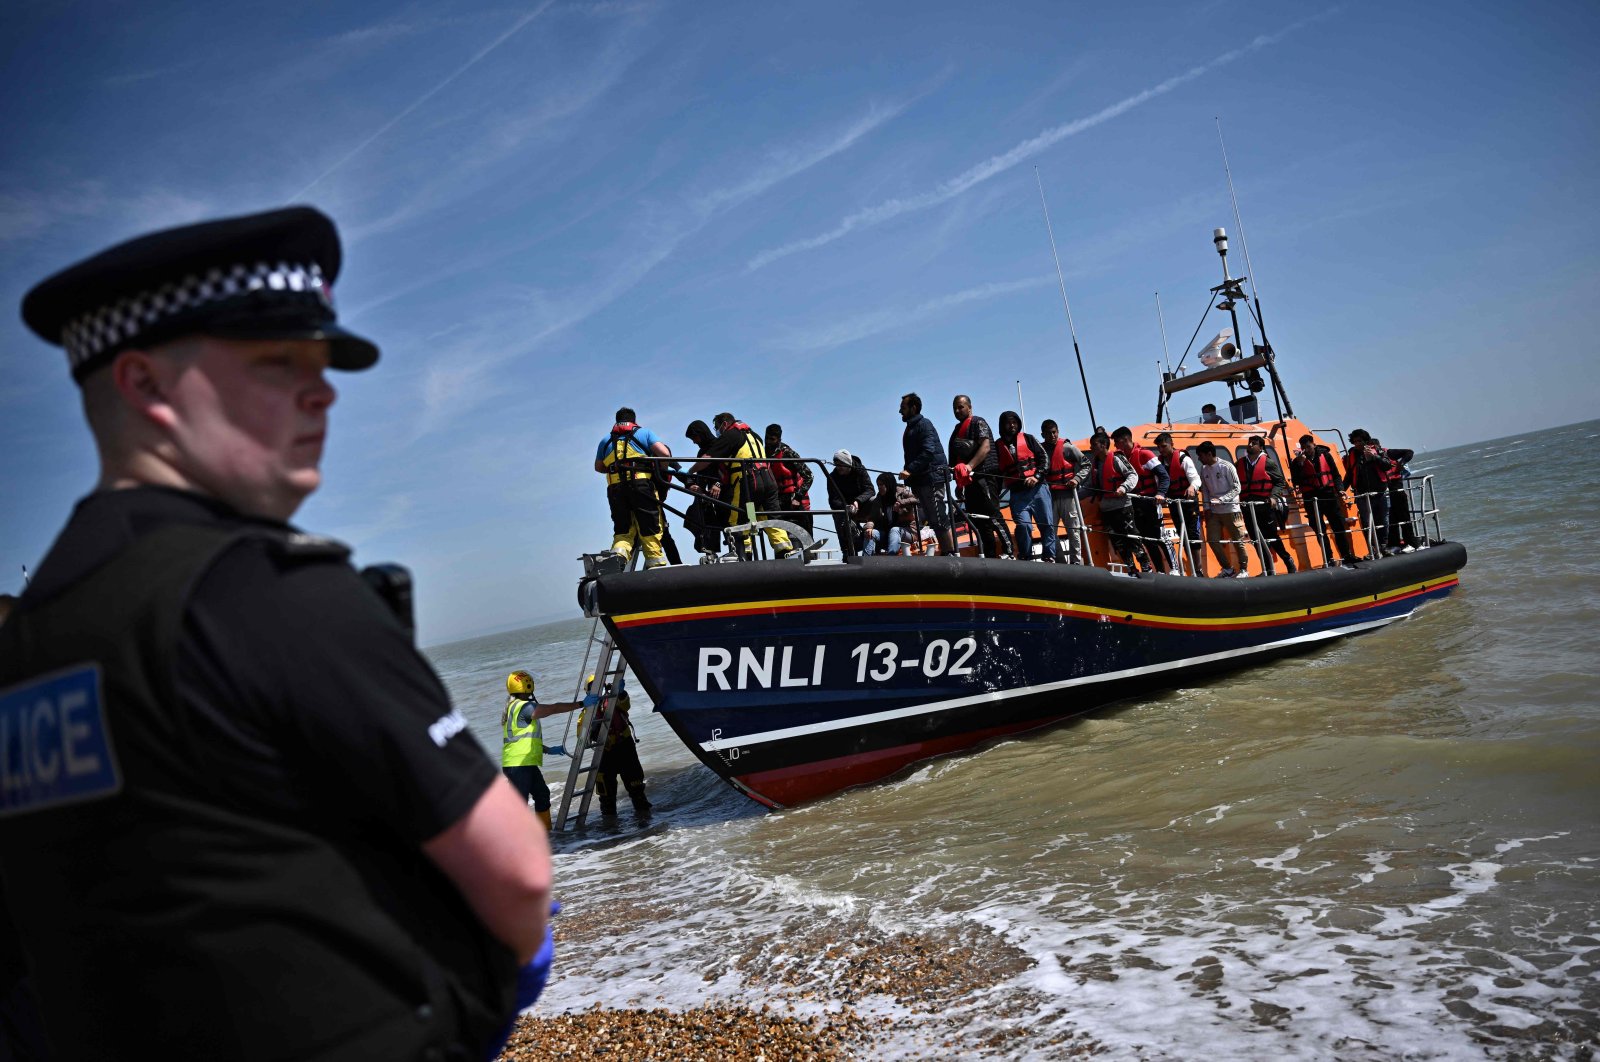 A British police officer stands guard on the beach of Dungeness, on the southeast coast of England, as Royal National Lifeboat Institution&#039;s (RNLI) members help migrants to disembark from one of their lifeboats after they were picked up at sea while attempting to cross the English Channel, June 15, 2022. (AFP Photo)